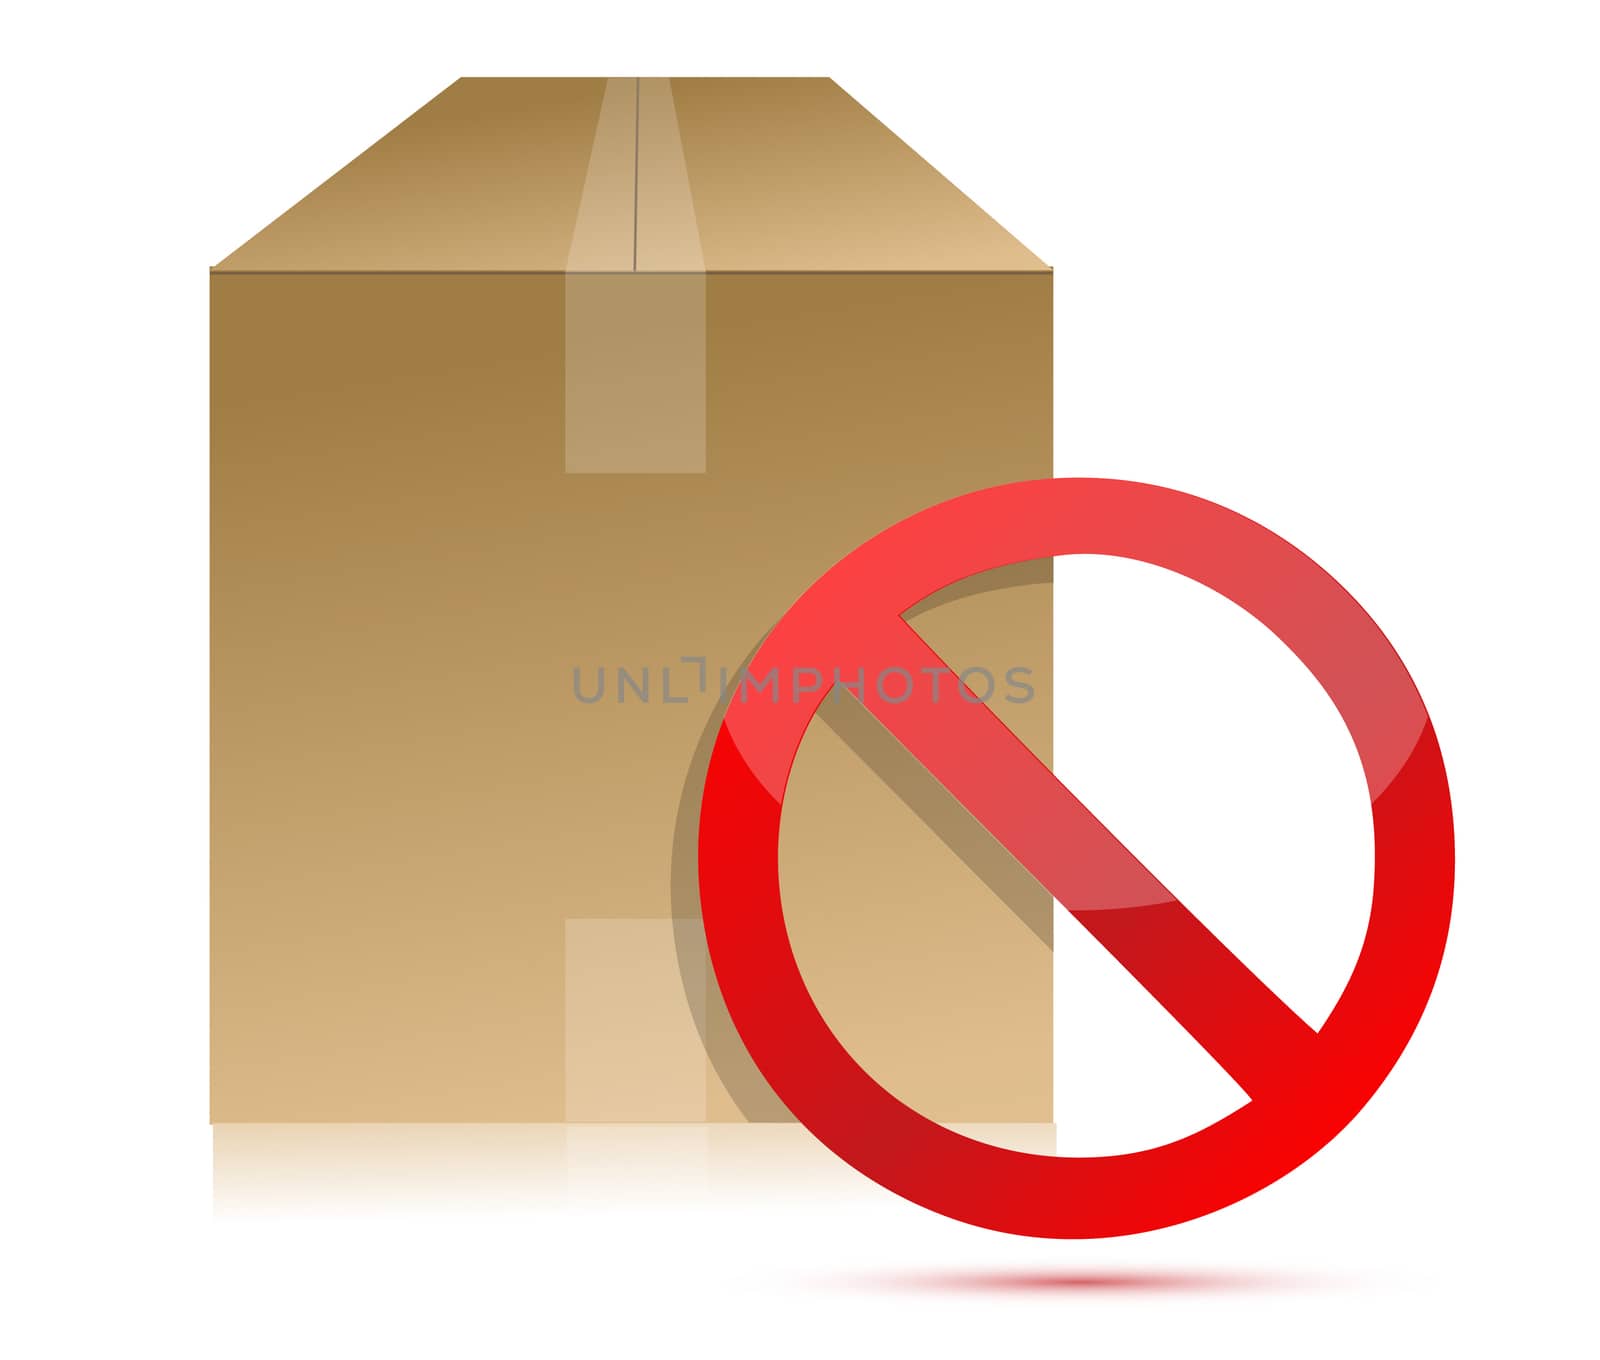 Shipping box with don't sign illustration